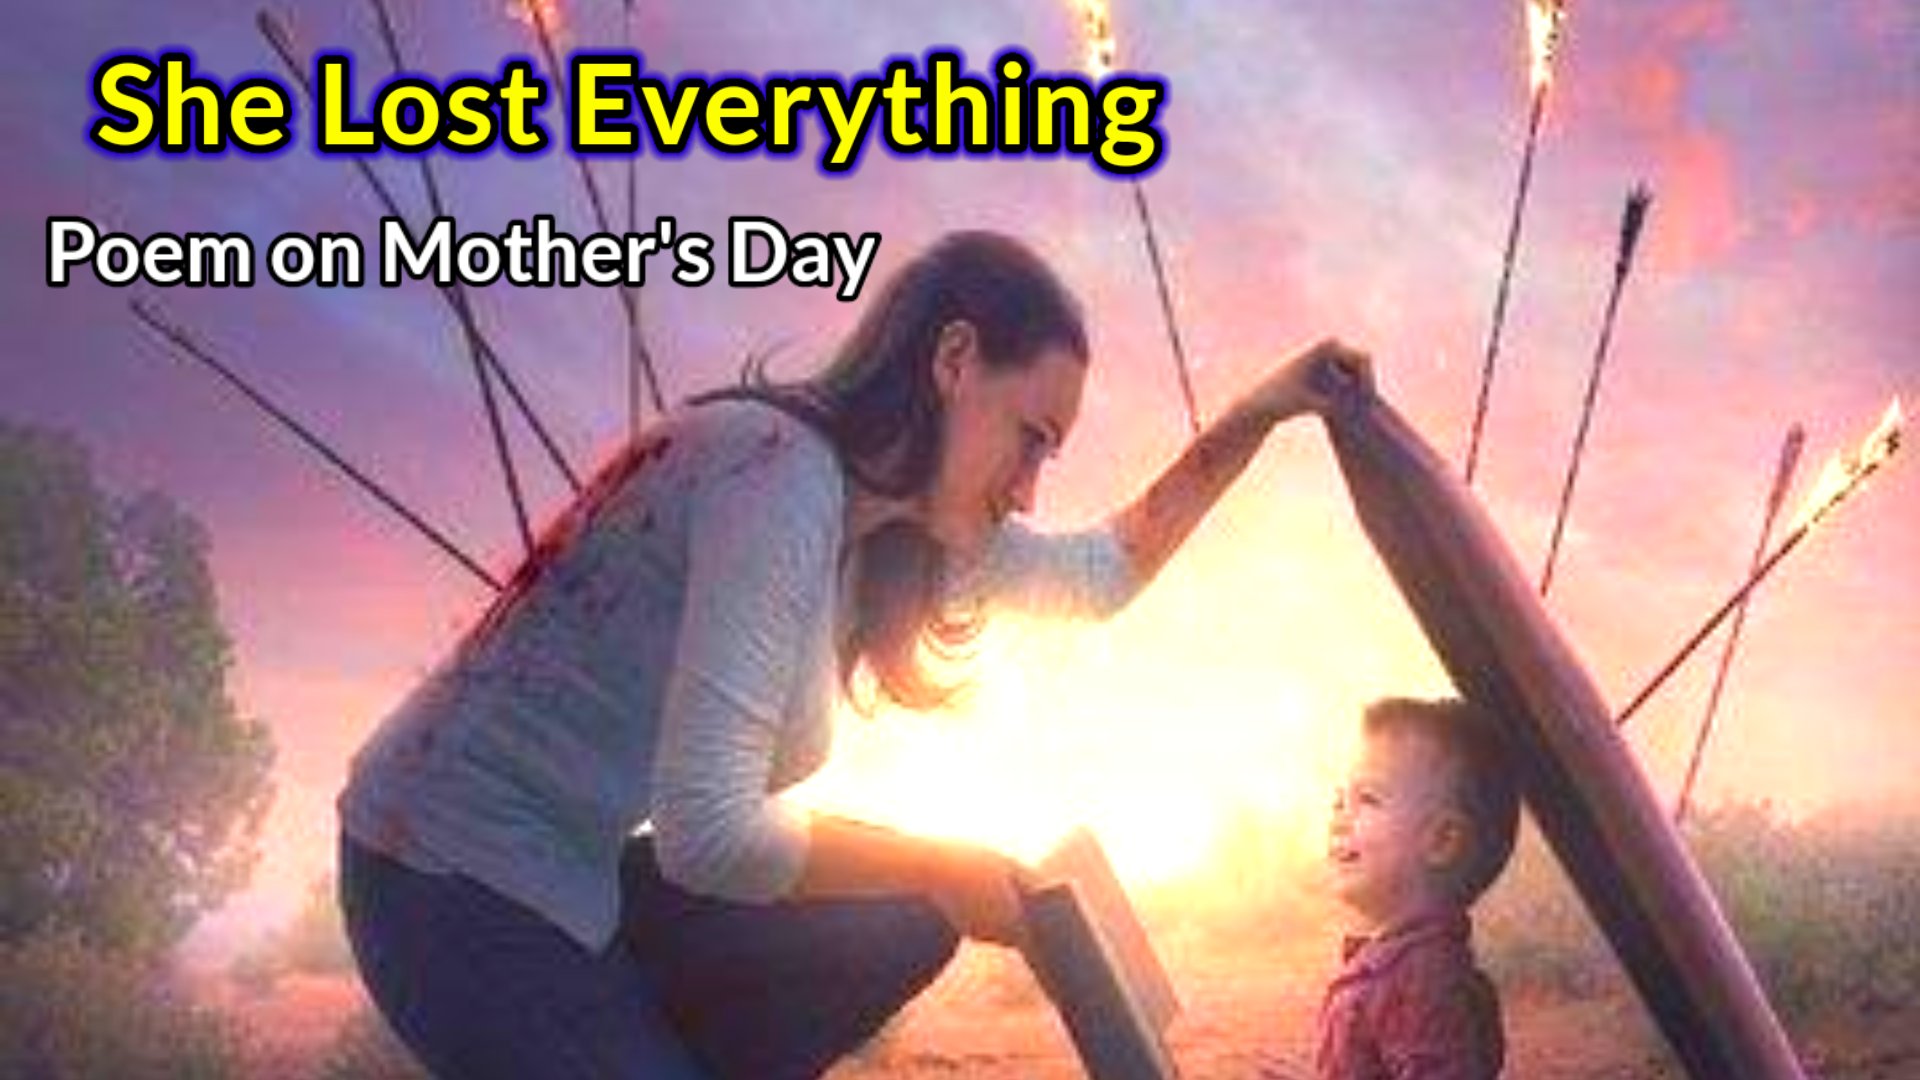 She Lost Everything - English Poem on Mother's Day Written by Amrit Sahu